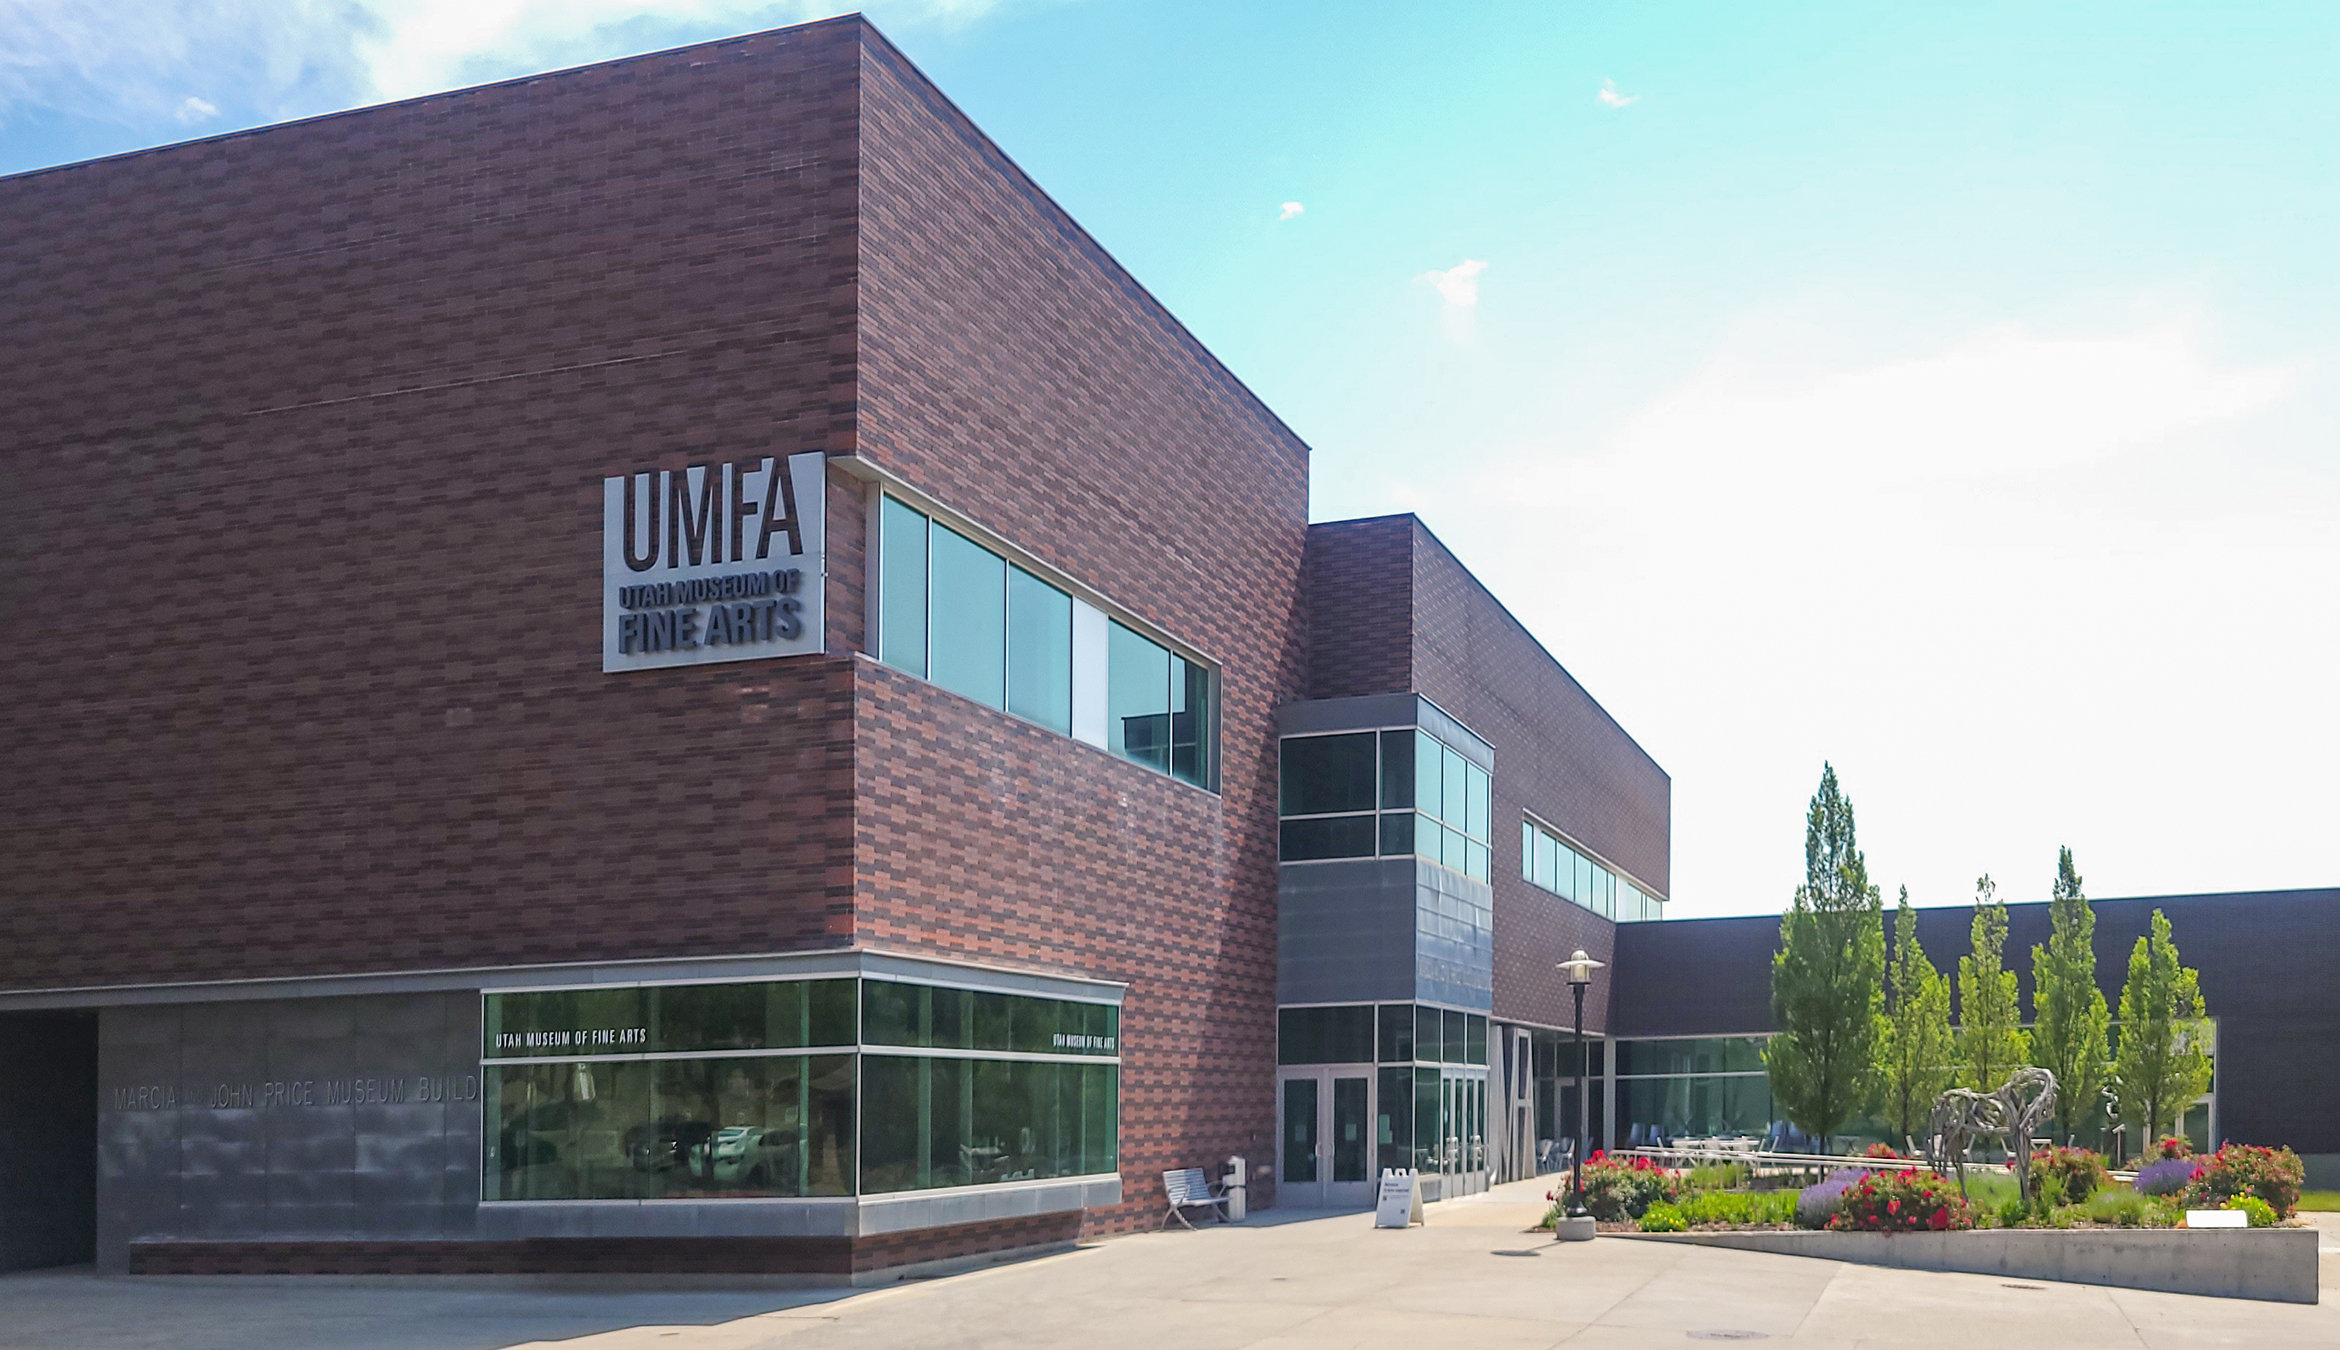 A large, brown brick building has large glass windows. There's a sign that says UMFA in large metal letters on the side of the building. The sun is out and the sky is blue. There are green trees and plants to the side of the building.